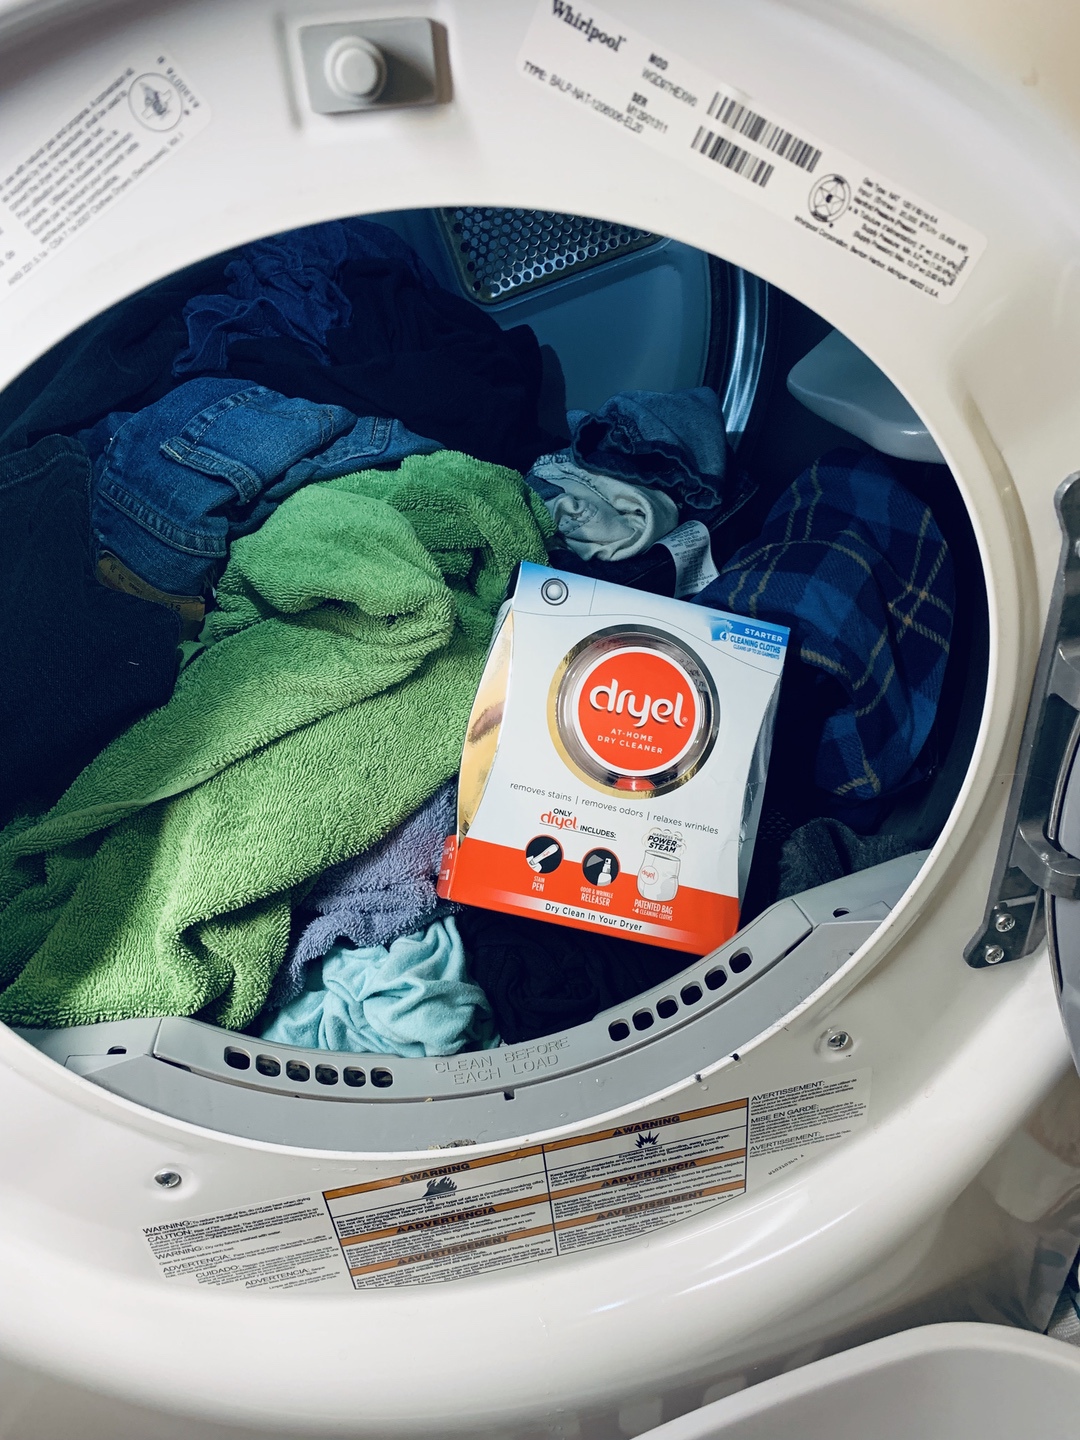 Dryel Dry Cleaning at Home in Dryer #Dryel #clean #cleaning #home #laundry #ad